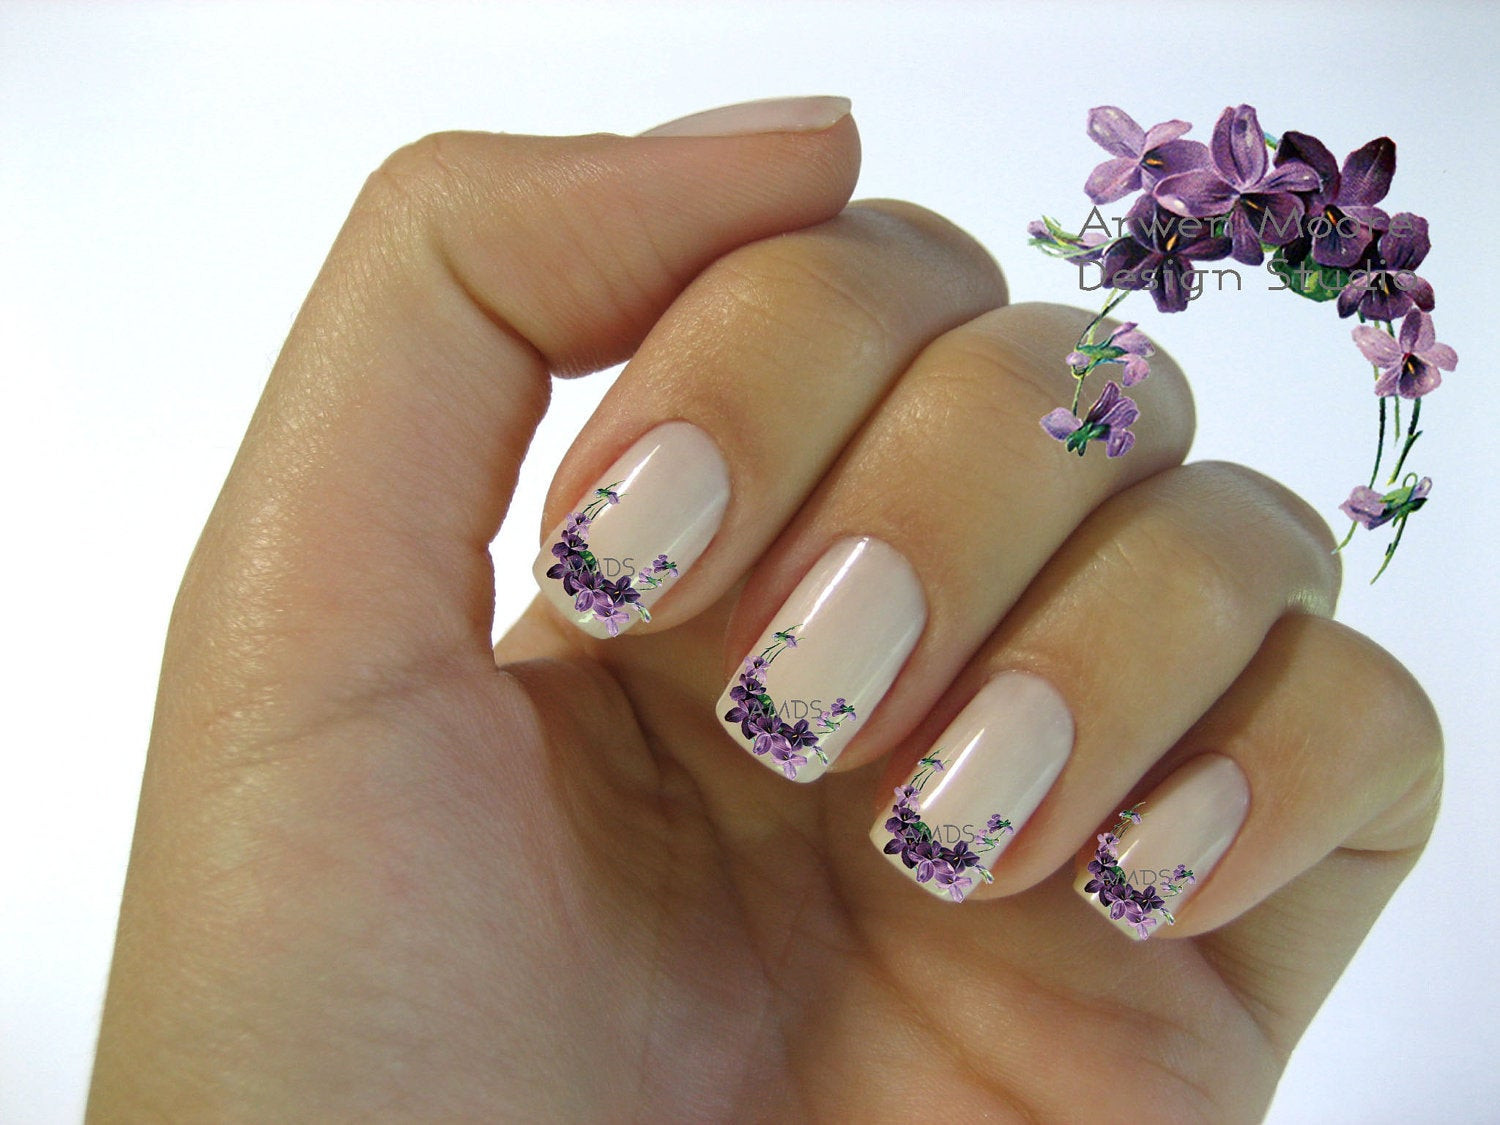 Vintage Nail Designs
 Very Chic Lavender Shabby Victorian Vintage Floral Nail Art